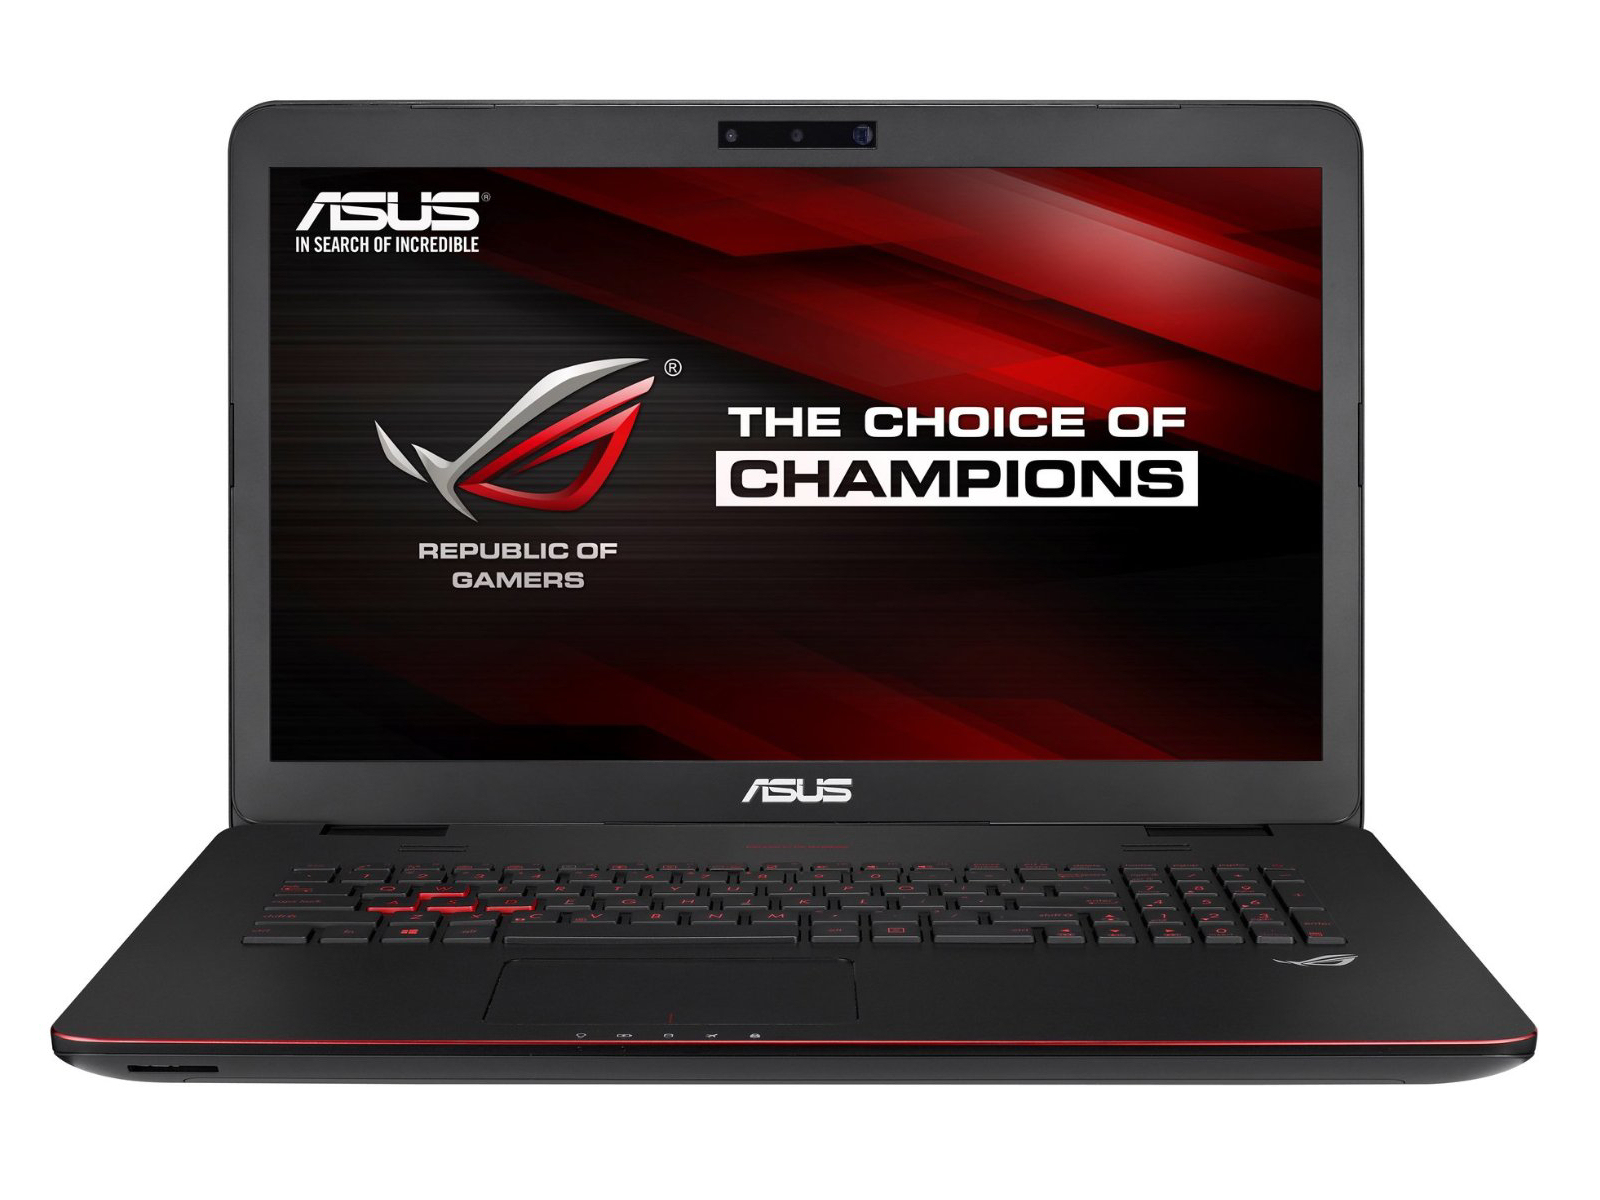 PC/タブレット デスクトップ型PC Asus GL771JW Notebook Review - NotebookCheck.net Reviews